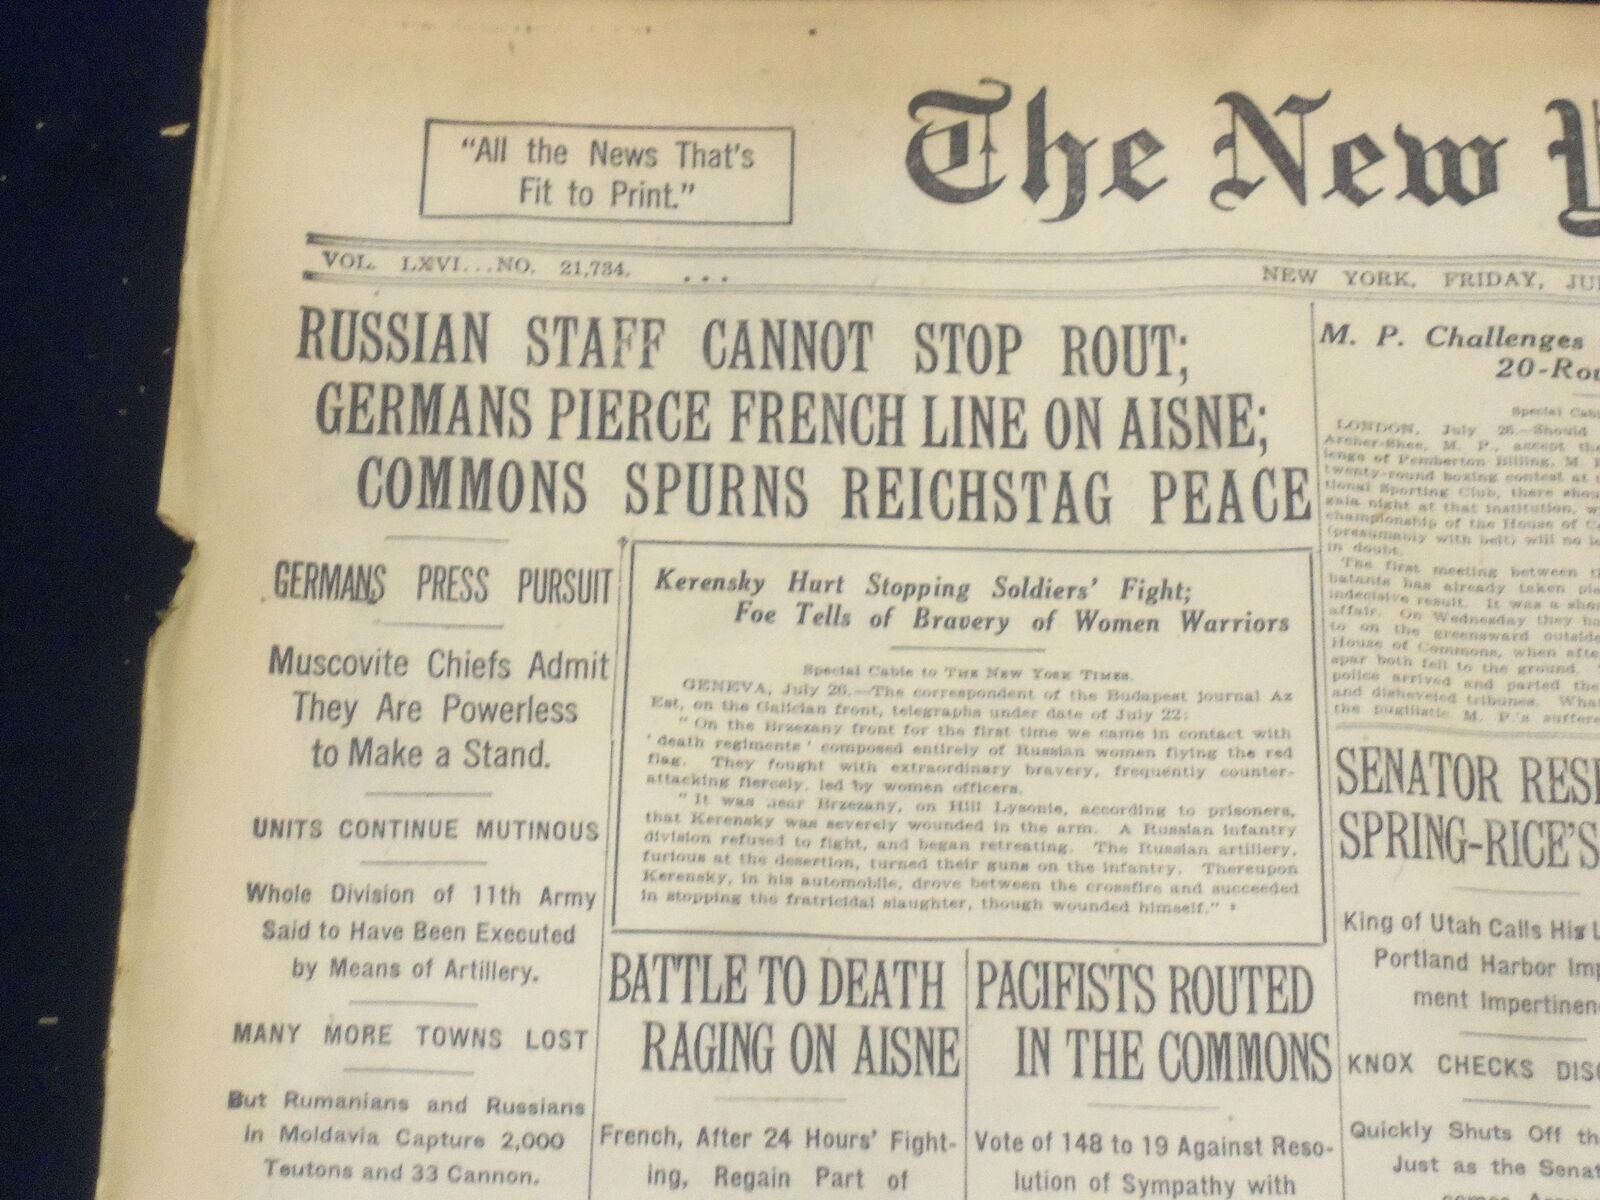 1917 JULY 27 NEW YORK TIMES - GERMANS PIERCE FRENCH LINE ON AISNE - NT 9311